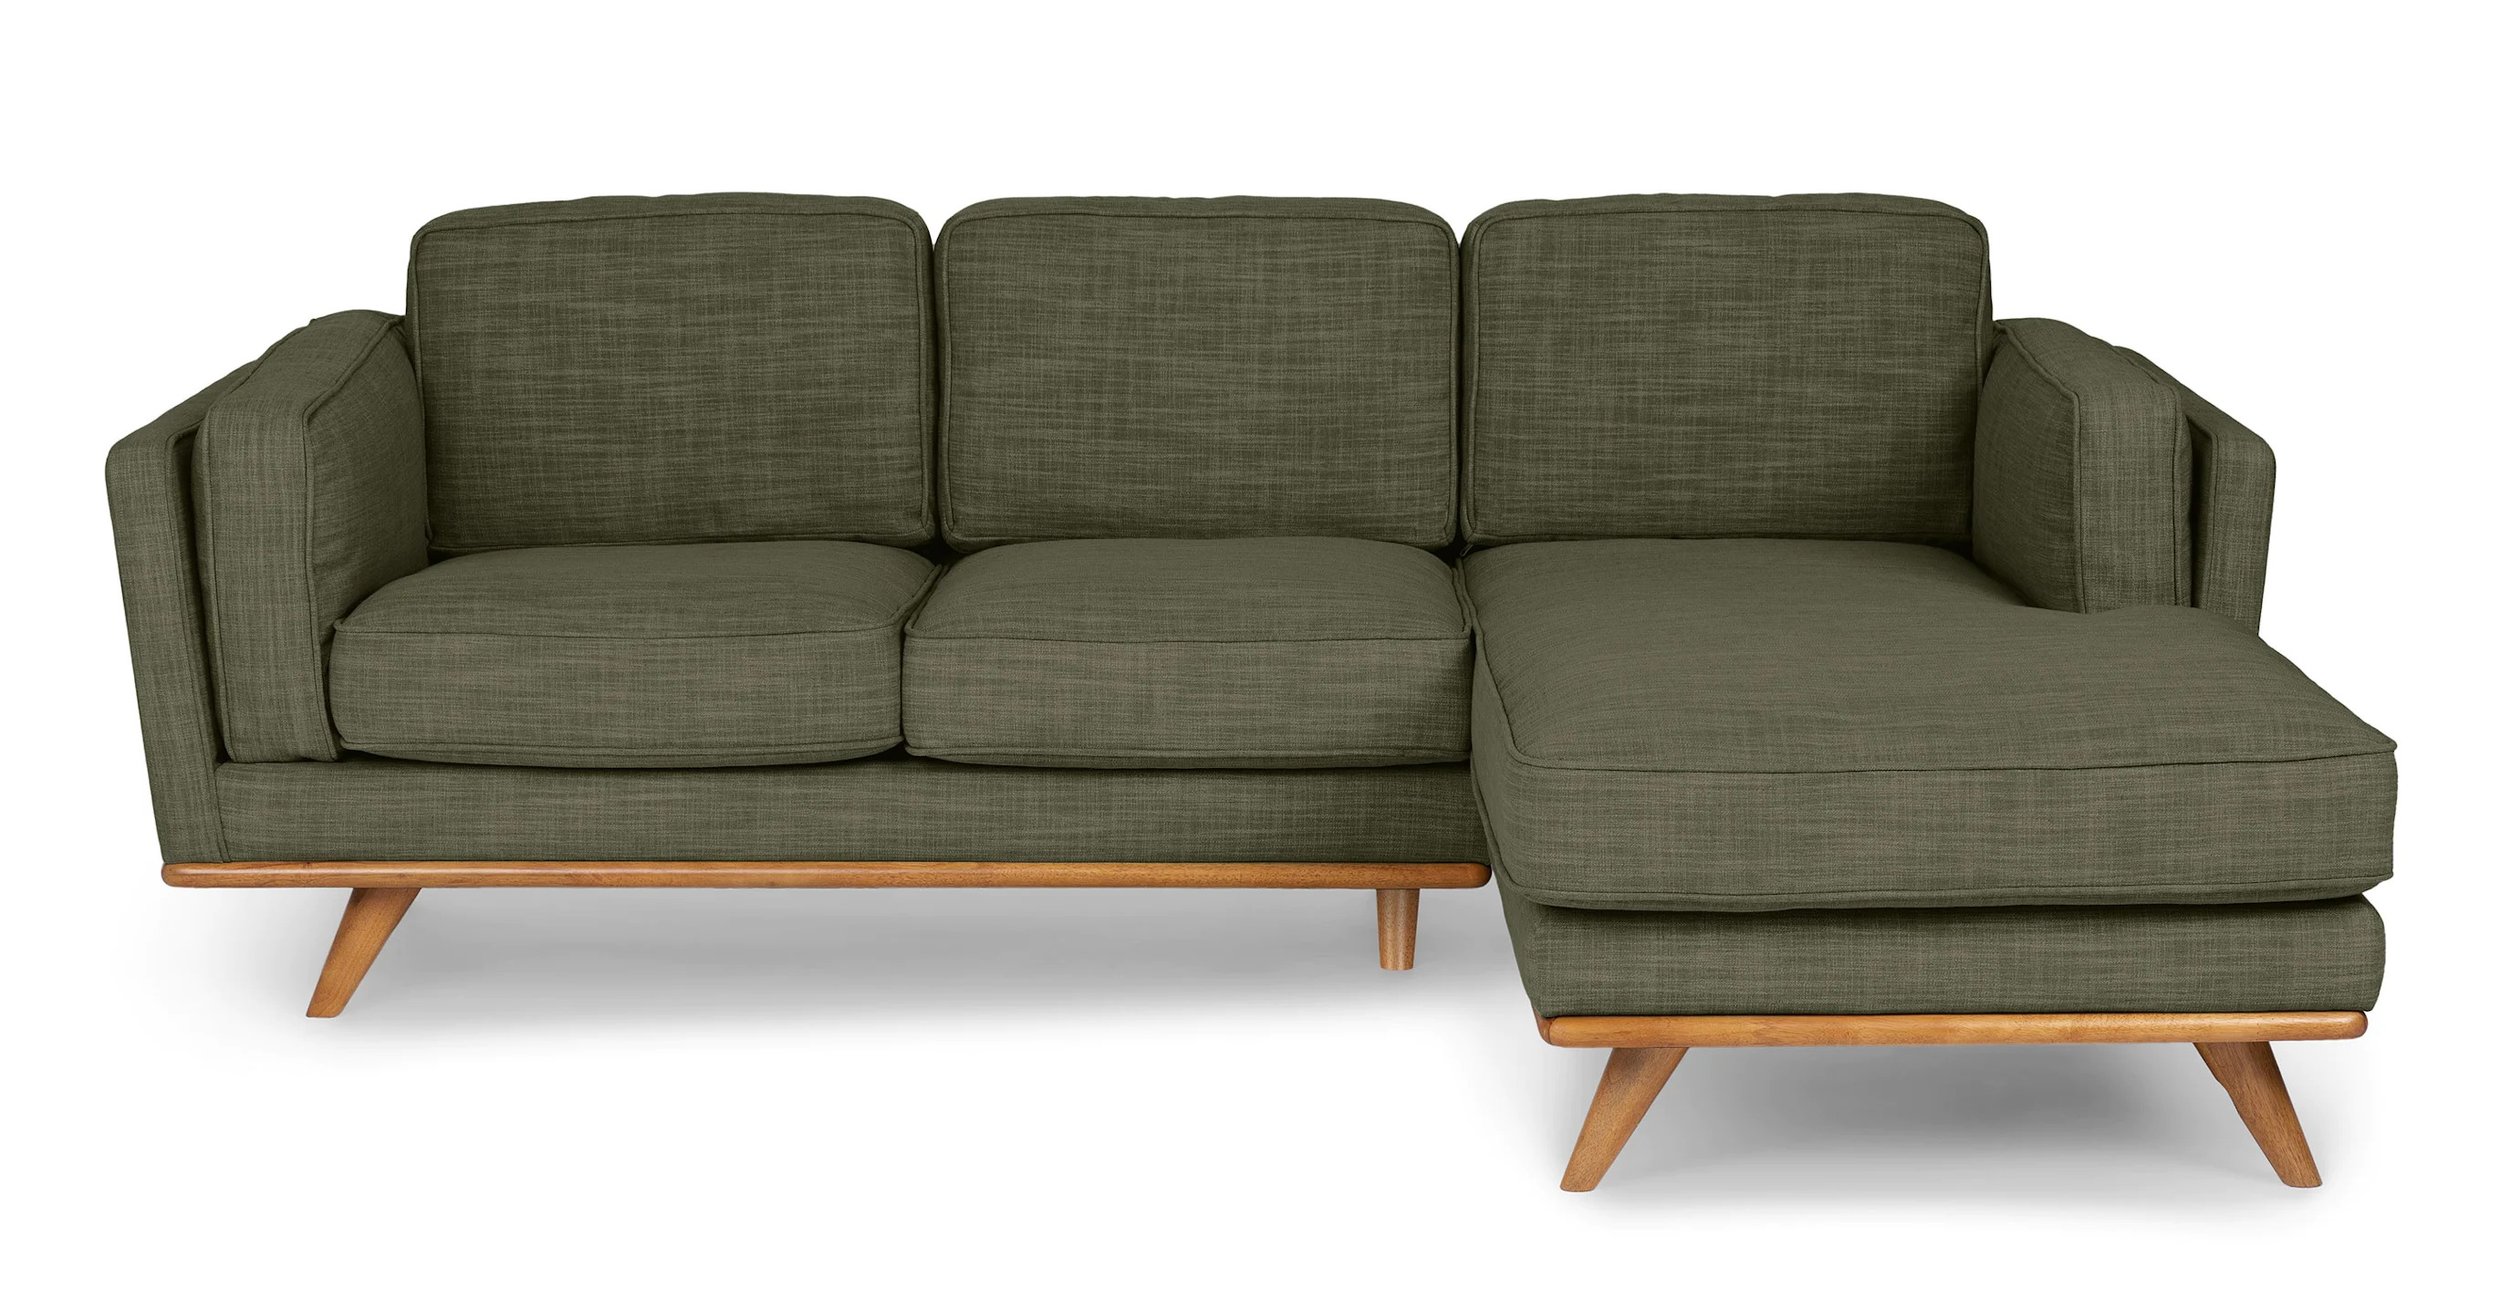 Article | Timber chaise sectional in Olio Green.